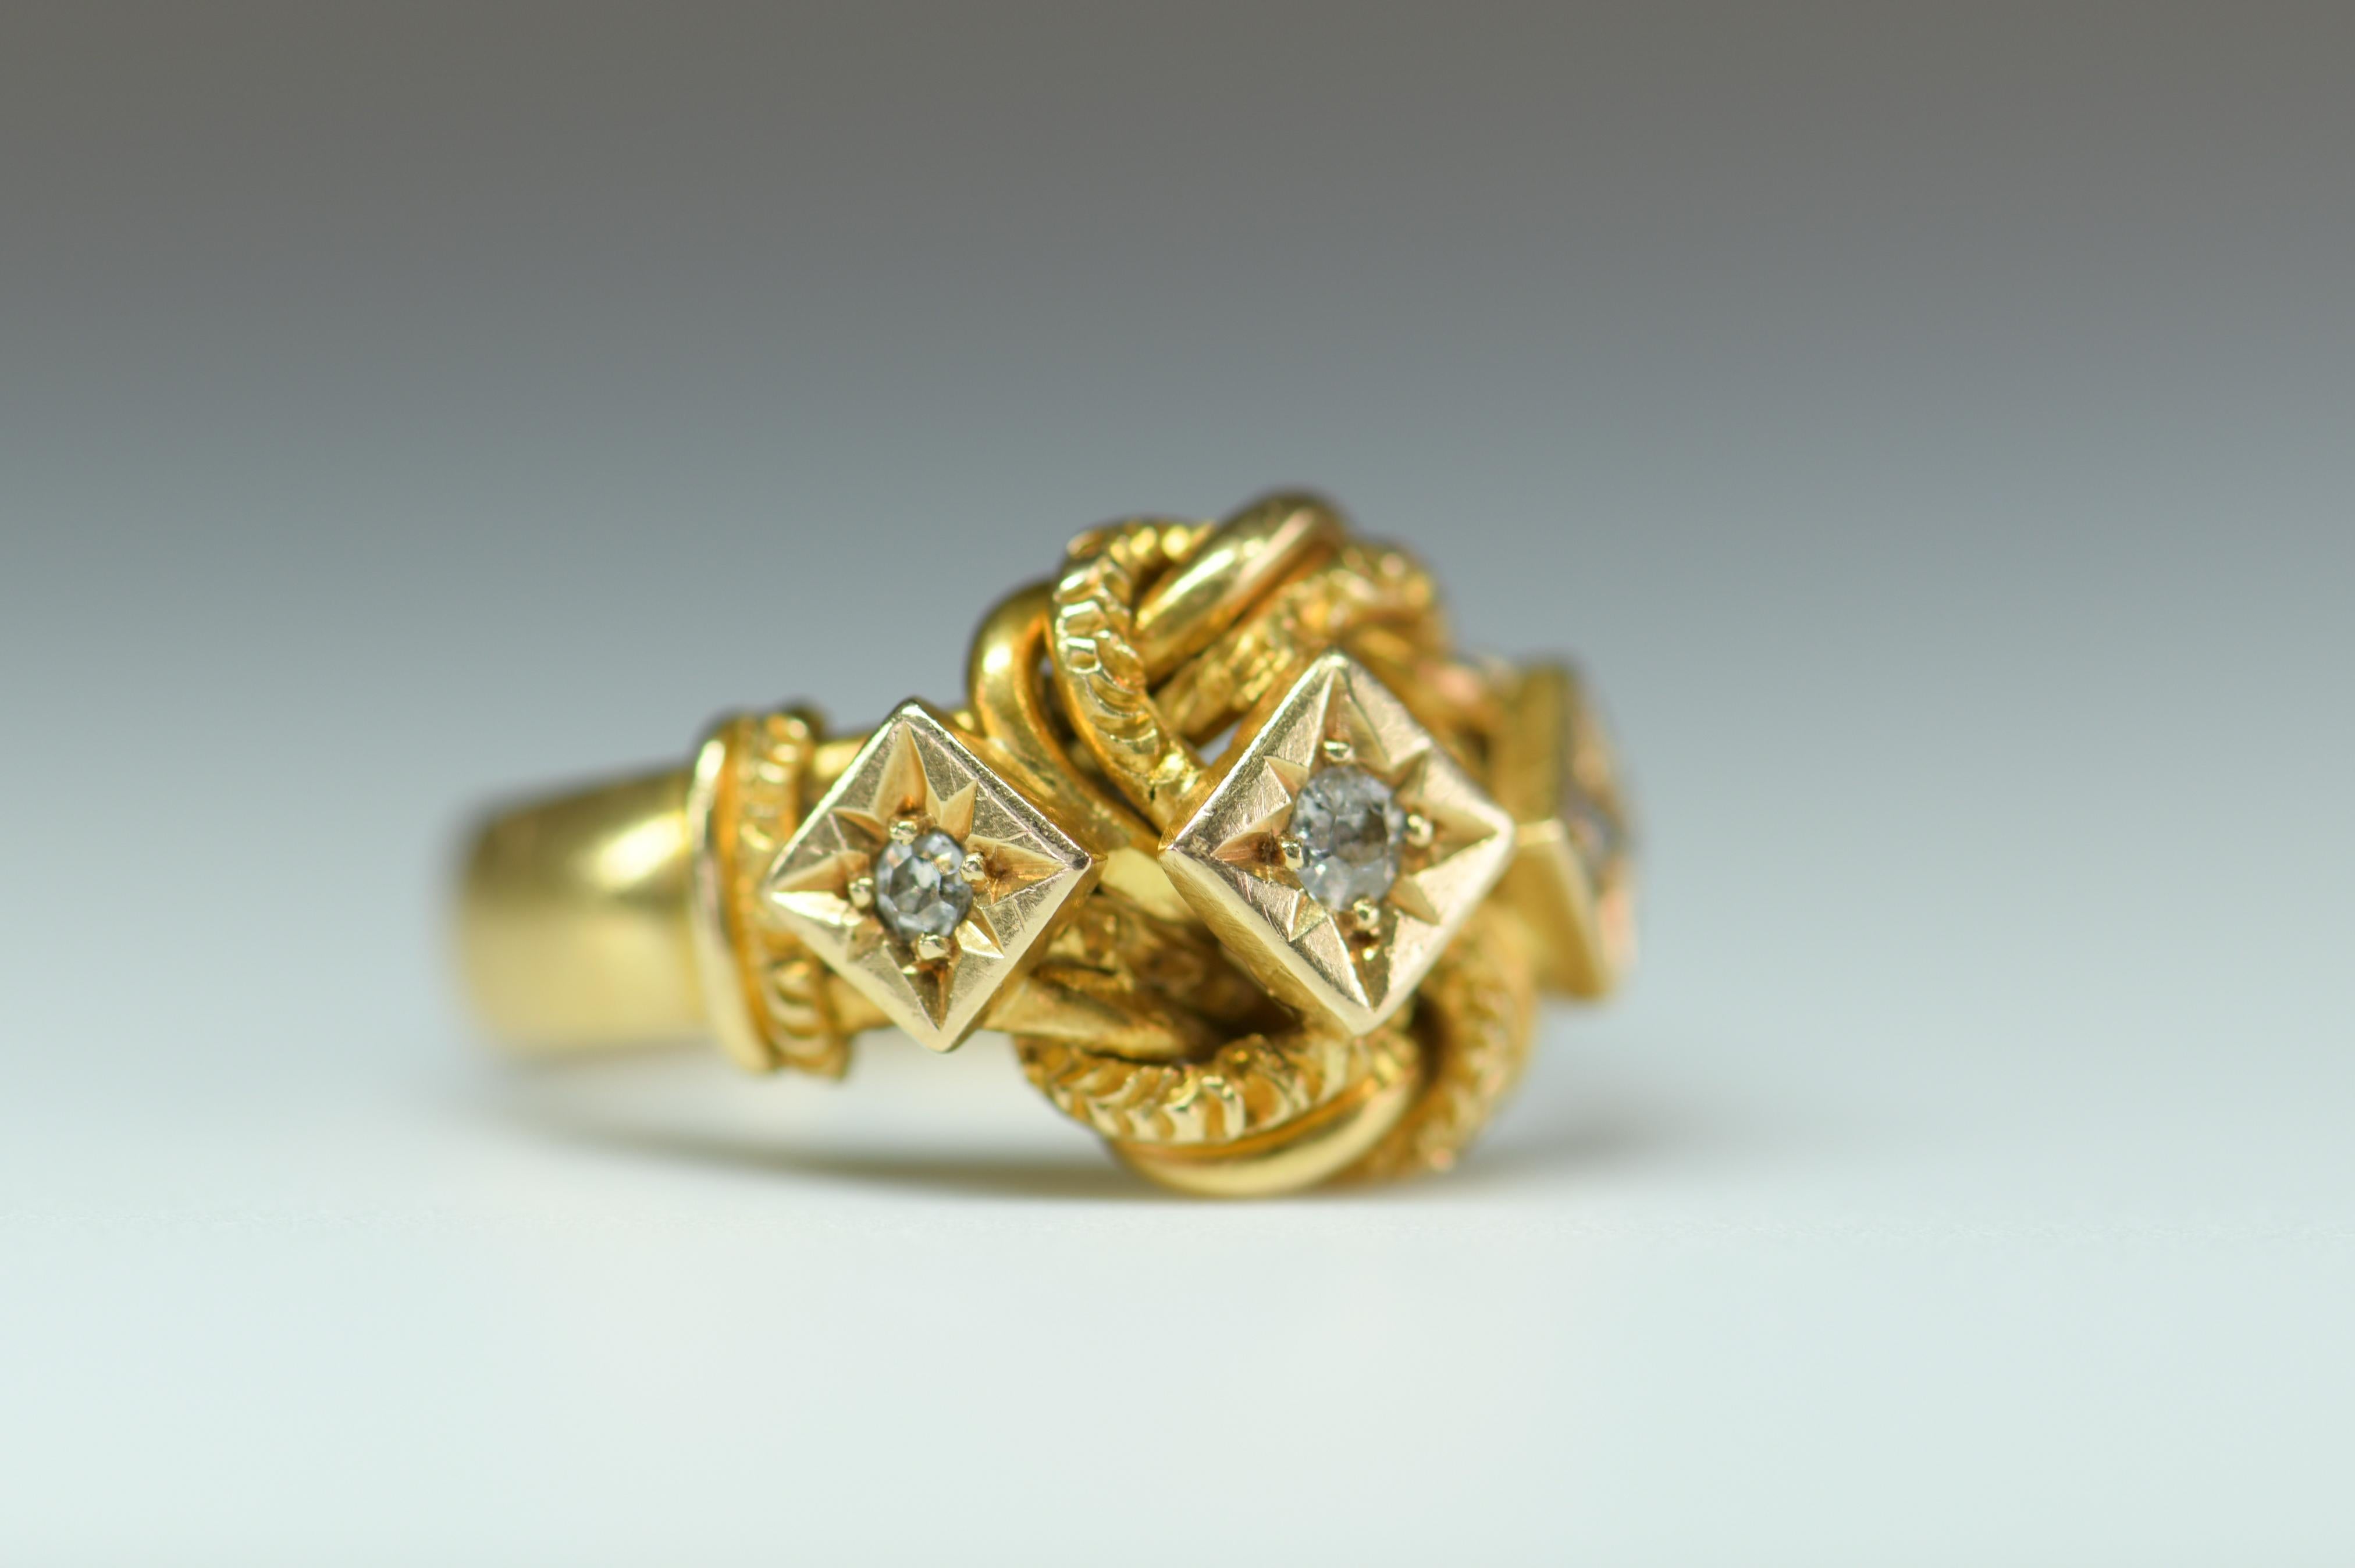 A good heavy 18ct gold love knot ring that was made in Birmingham in 1912. At that time knot rings were very popular as they literally meant “Tying the knot” that bound two people together. It has been set with three diamonds that further accentuate